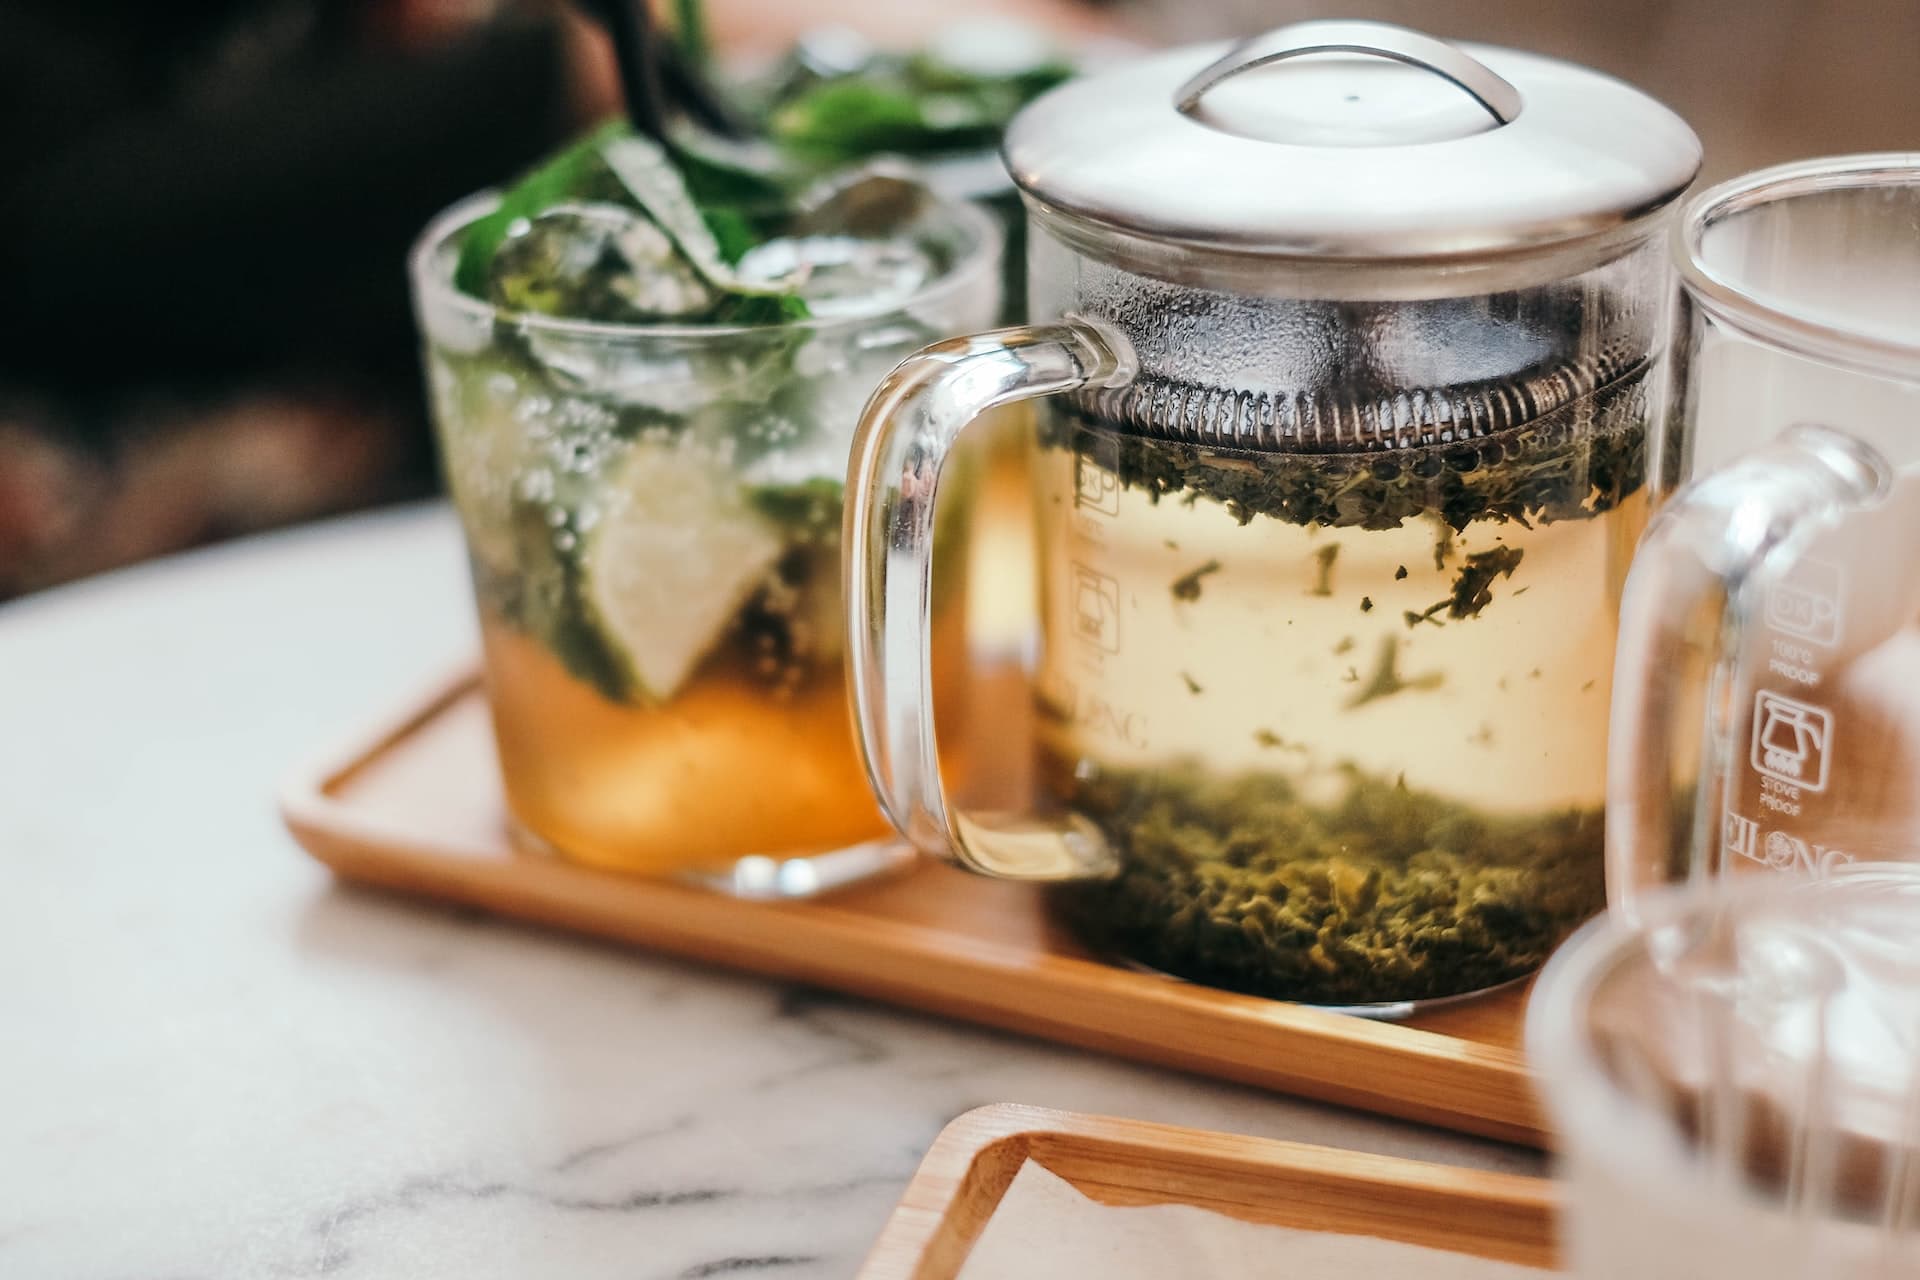 How to brew leaf tea? This is worth knowing